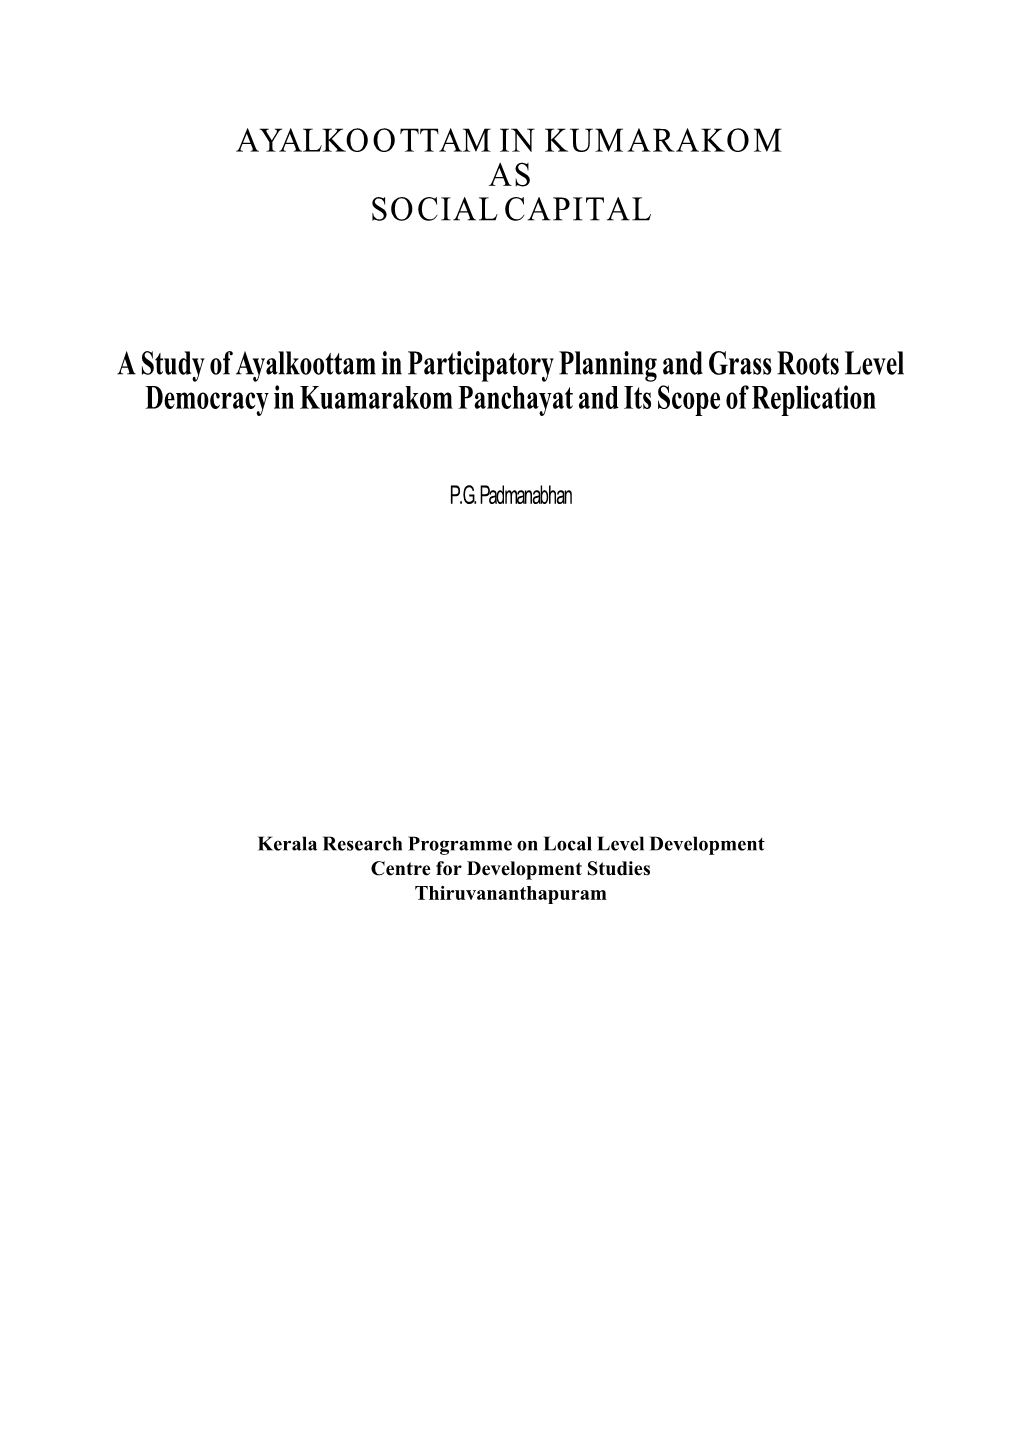 A Study of Ayalkoottam in Participatory Planning and Grass Roots Level Democracy in Kuamarakom Panchayat and Its Scope of Replication